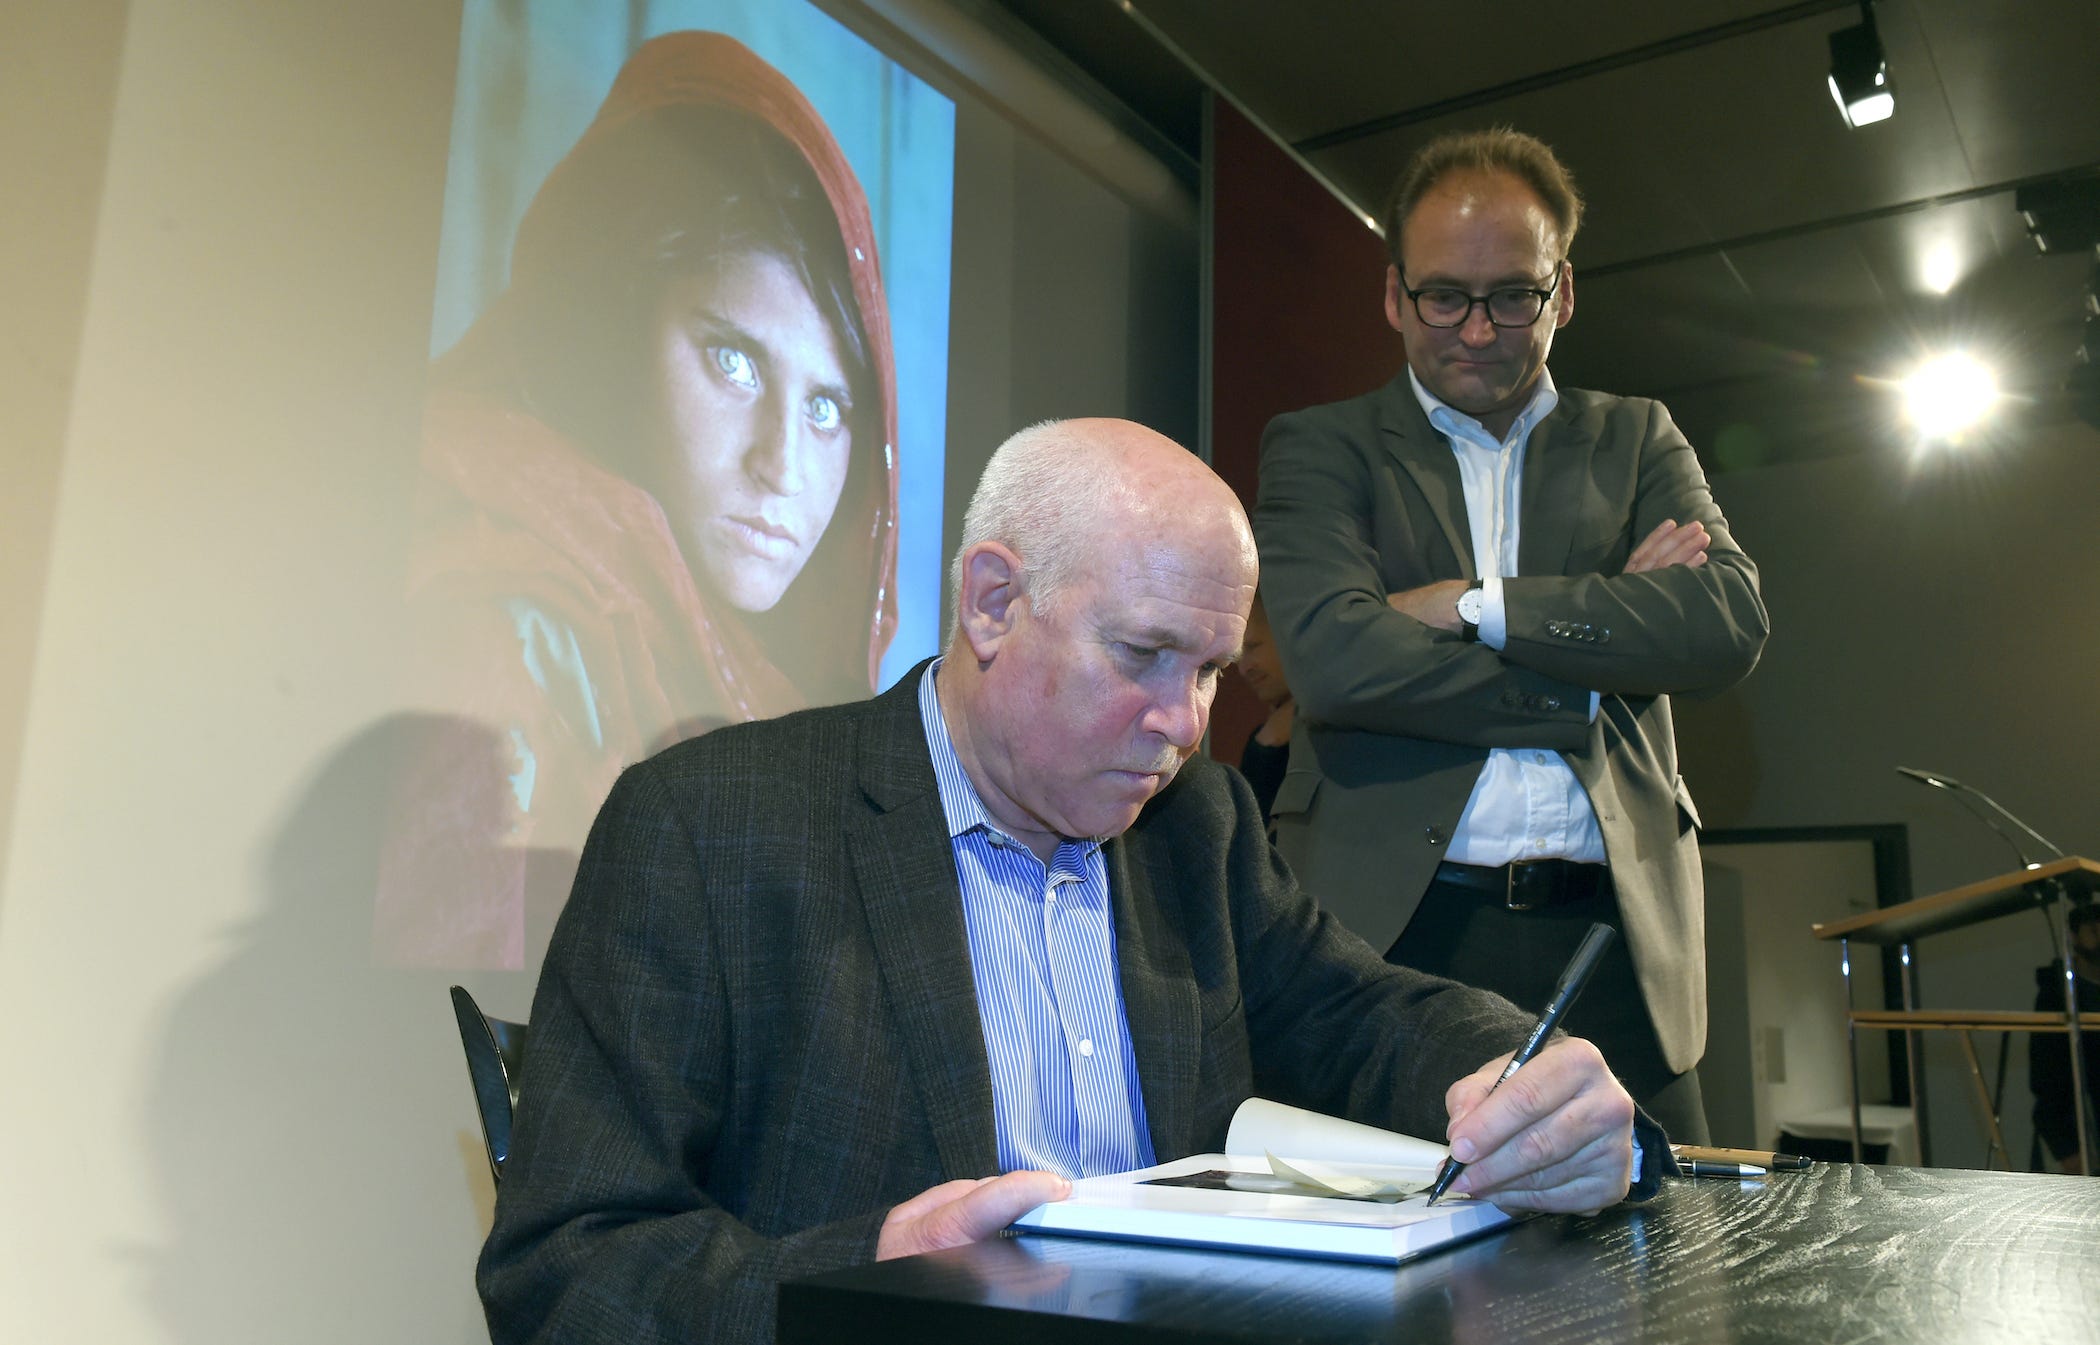 photographer steve mccurry seated, signing a book